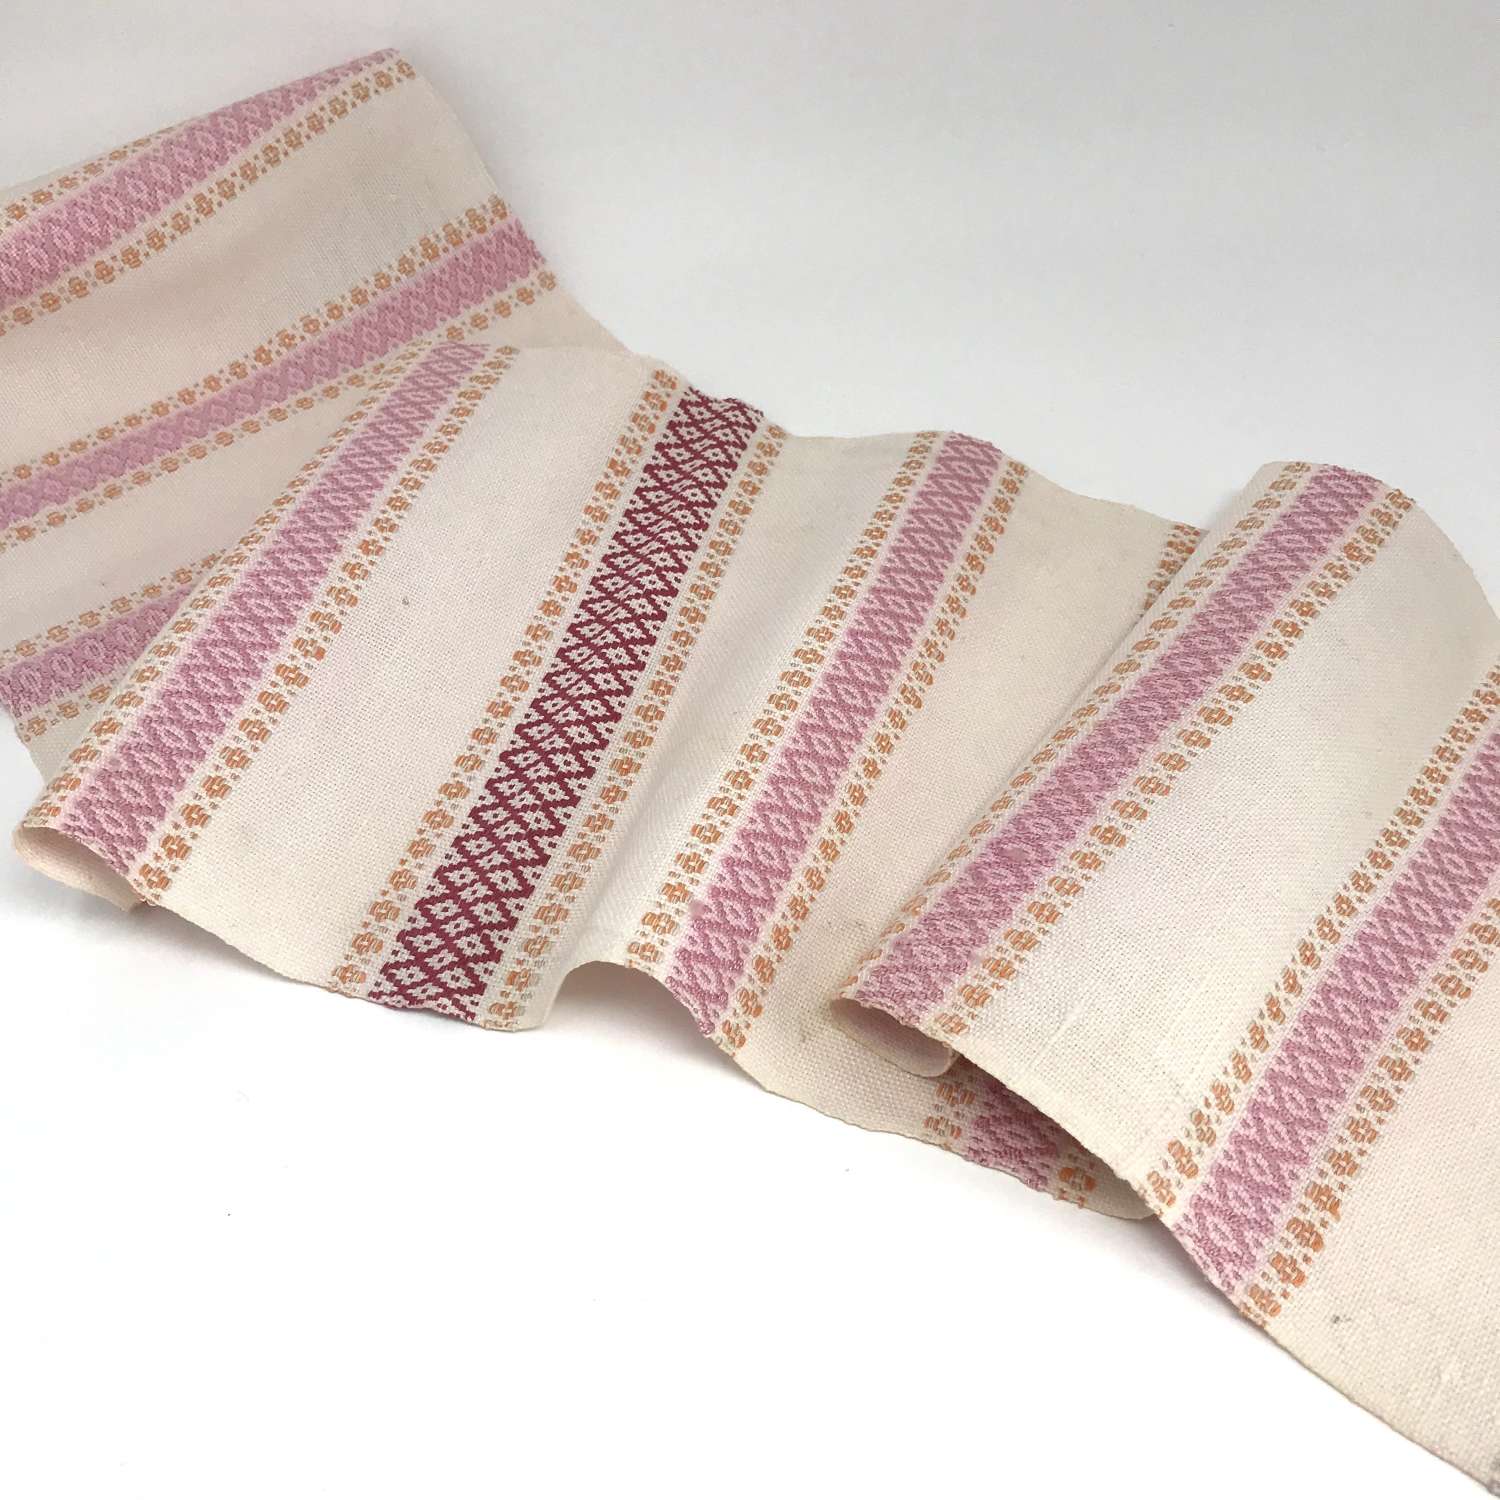 Swedish Handwoven and Embroidered Table Runner Pink and Orange Pattern